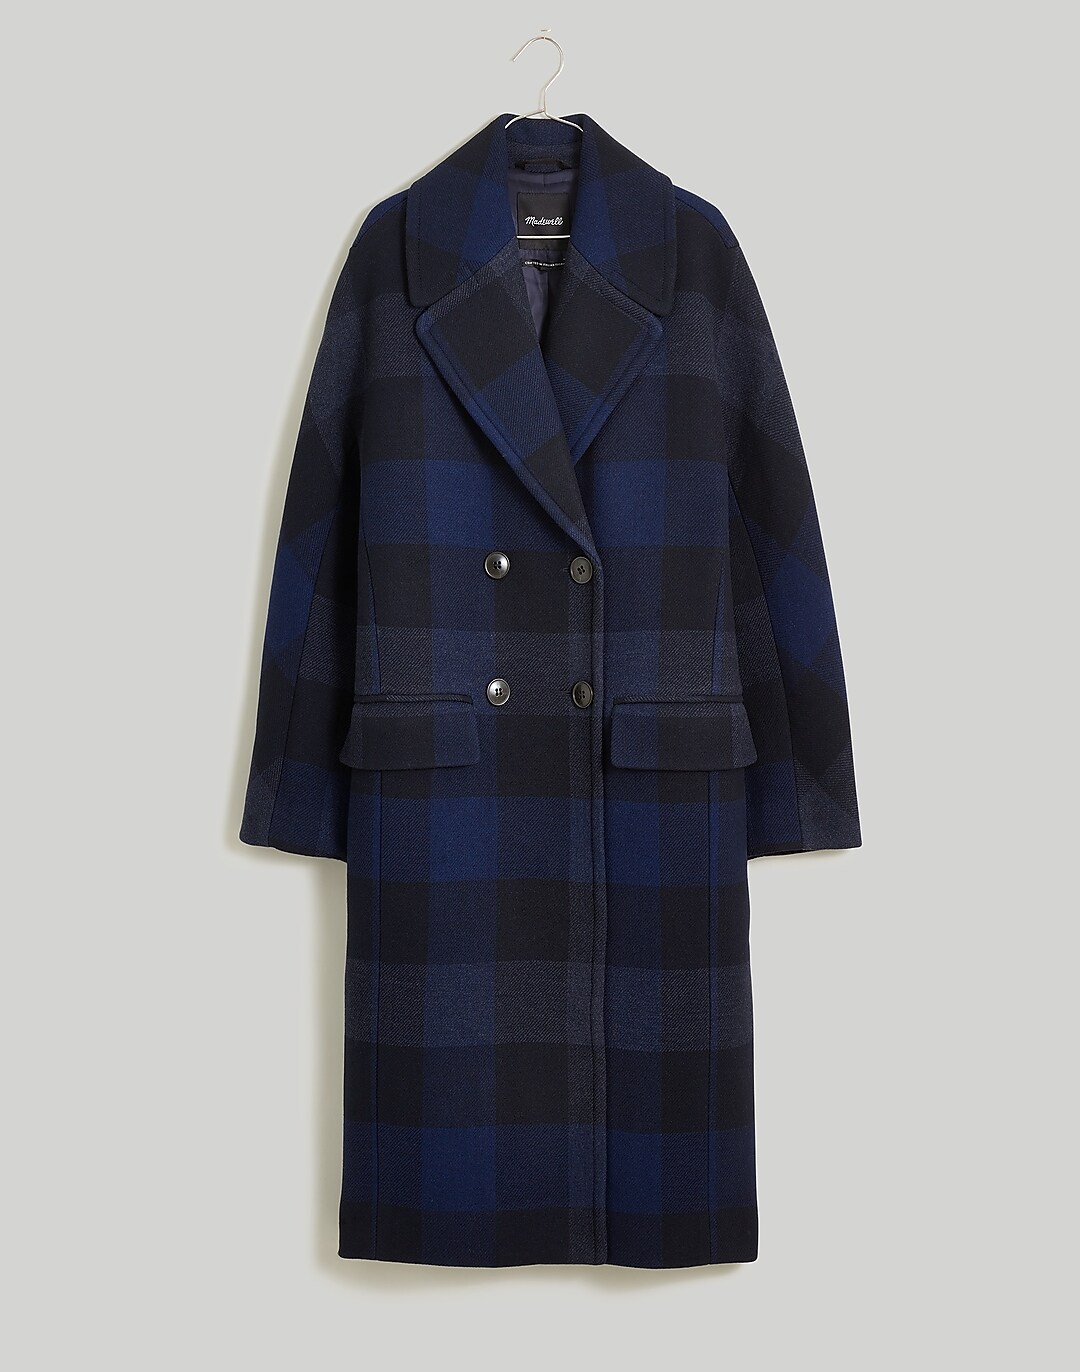 The Gianna Coat in Plaid Insuluxe Fabric